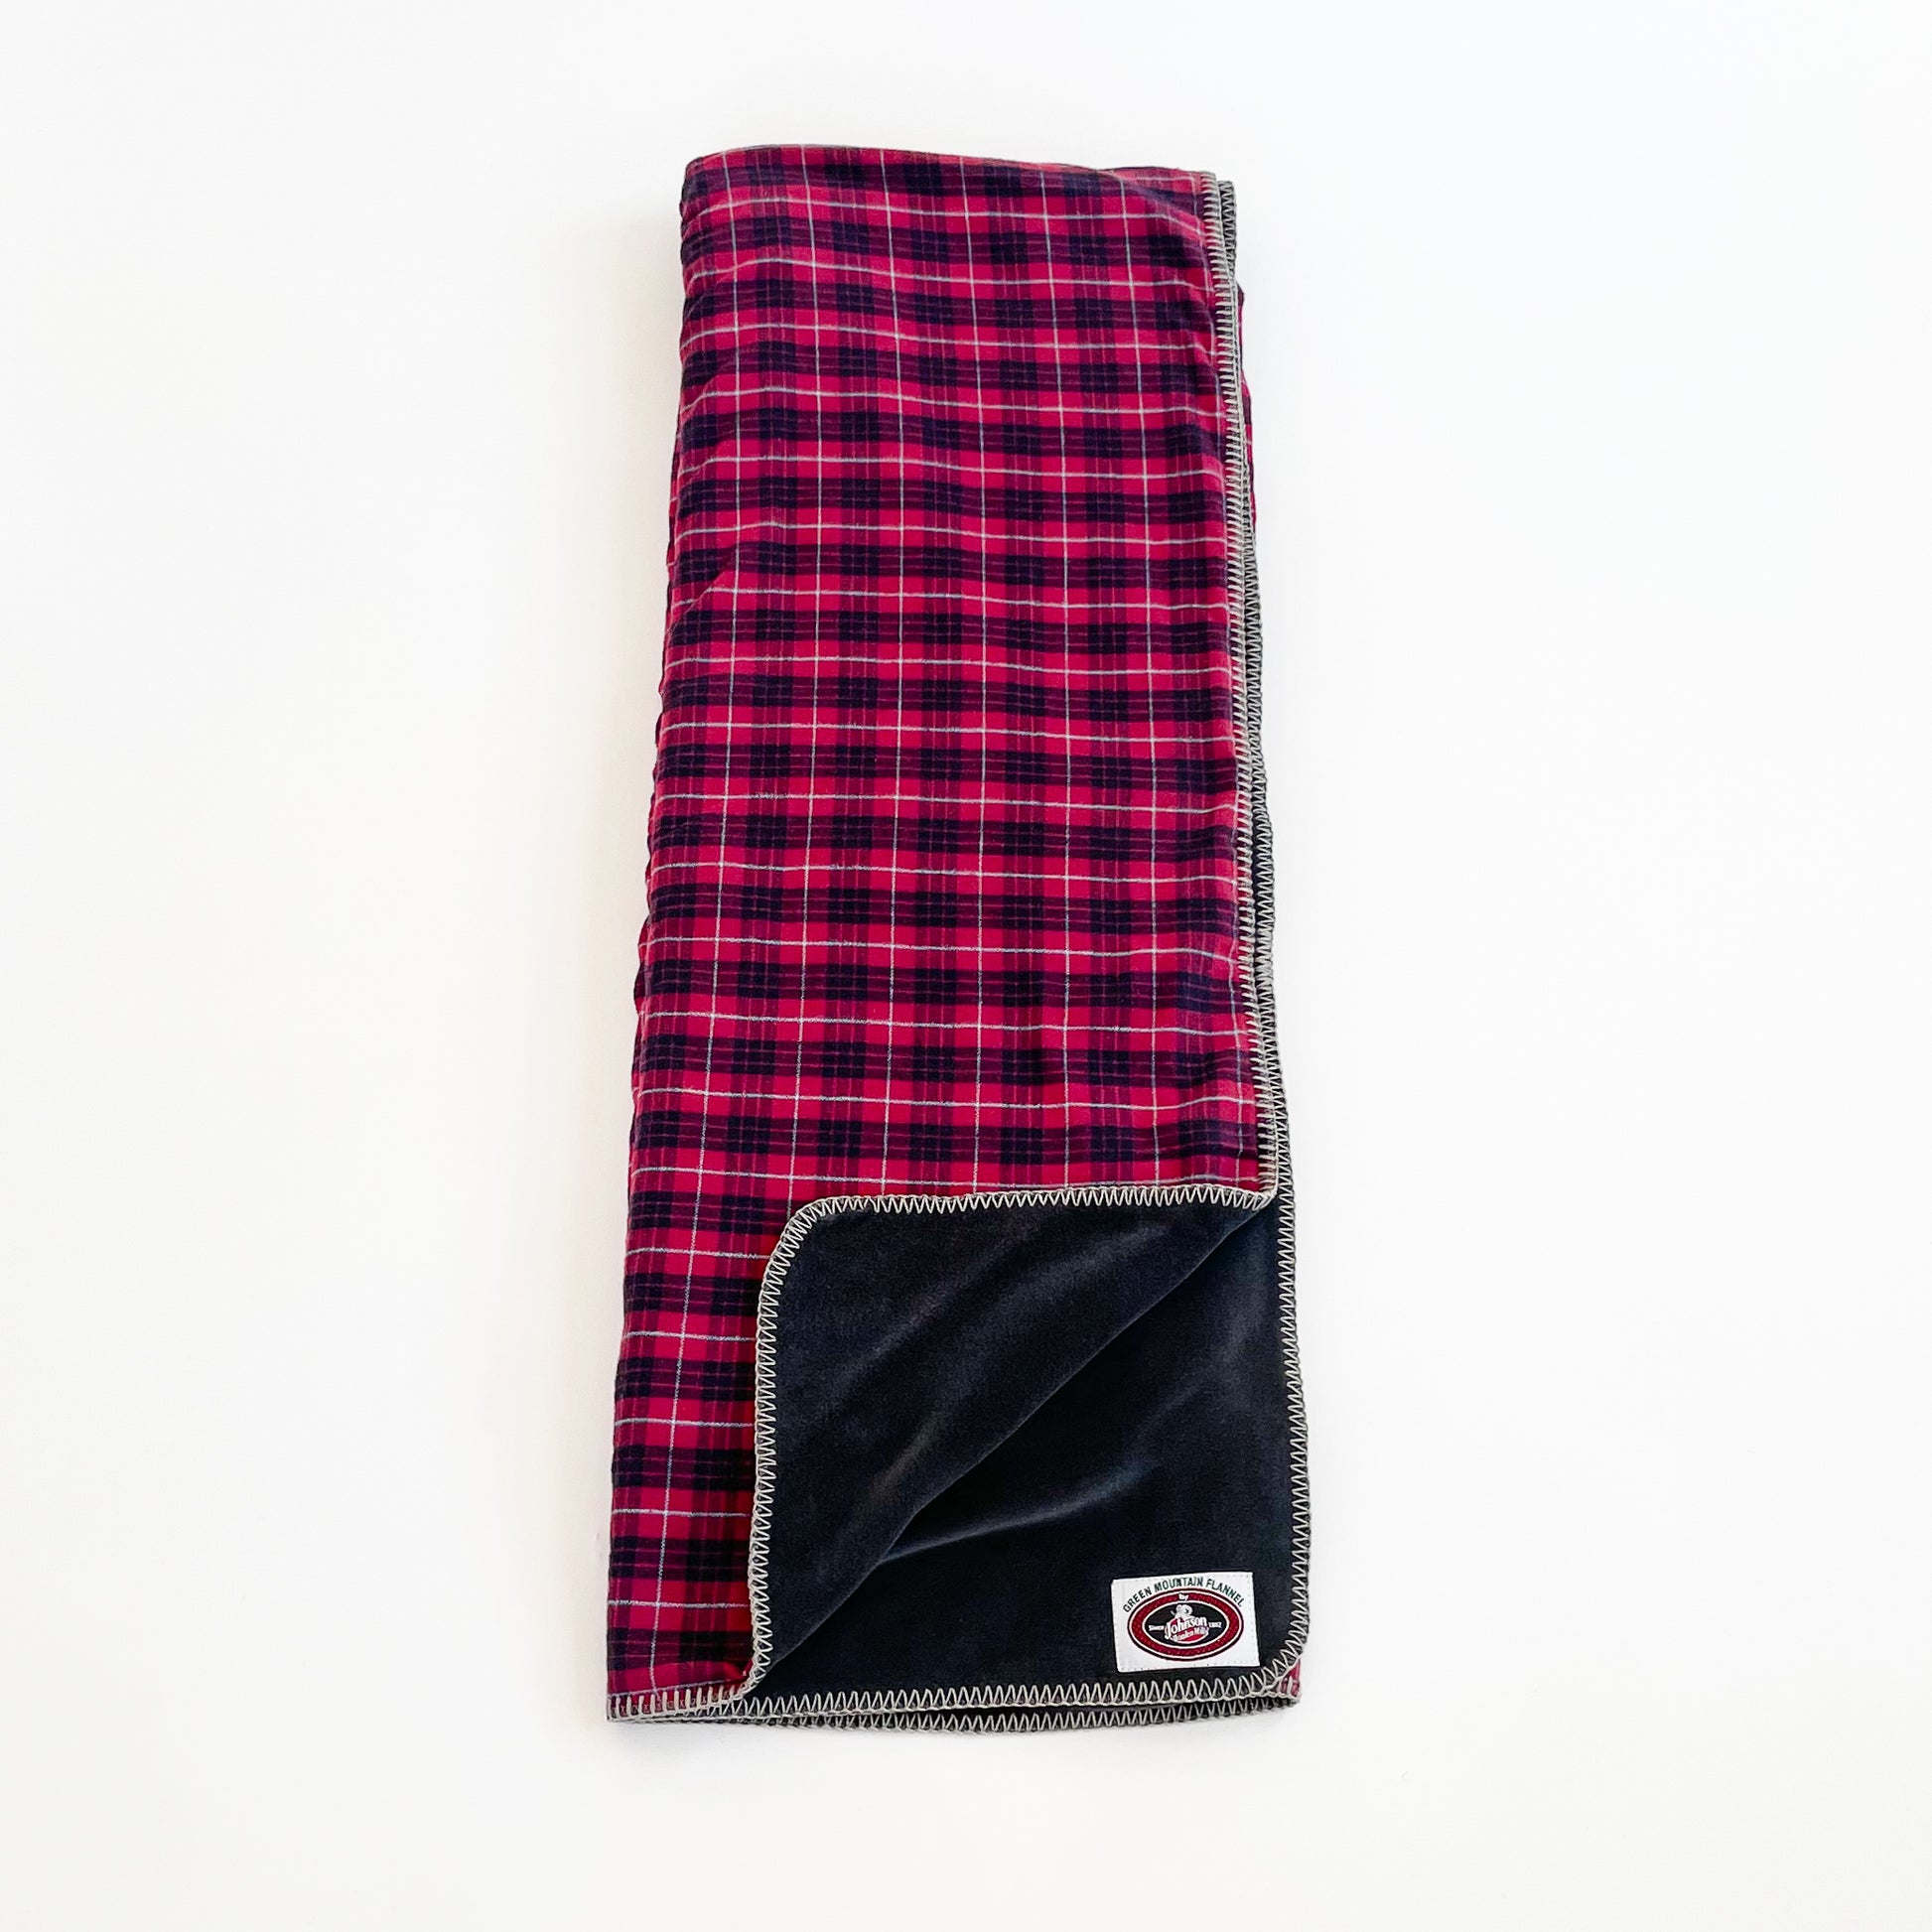 Red, black with white pinstripe plaid Flannel throw blanket laid out with black fleece lining